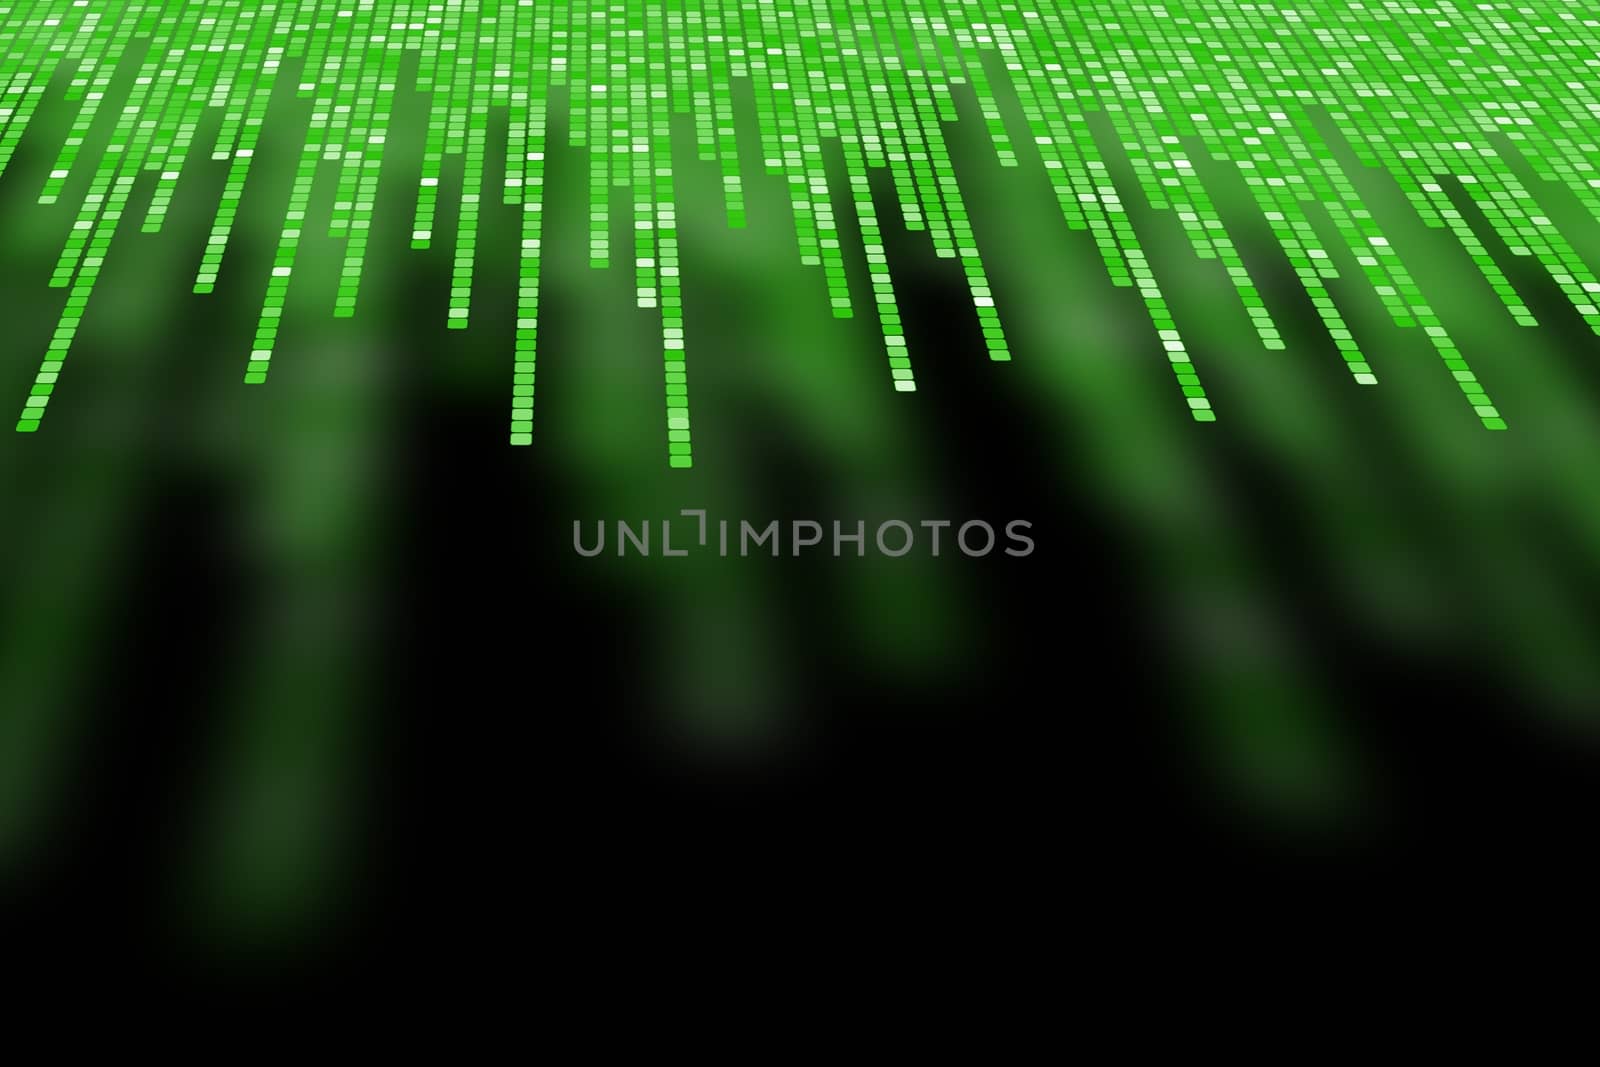 matrix made of green square polkadots on black background, perspective